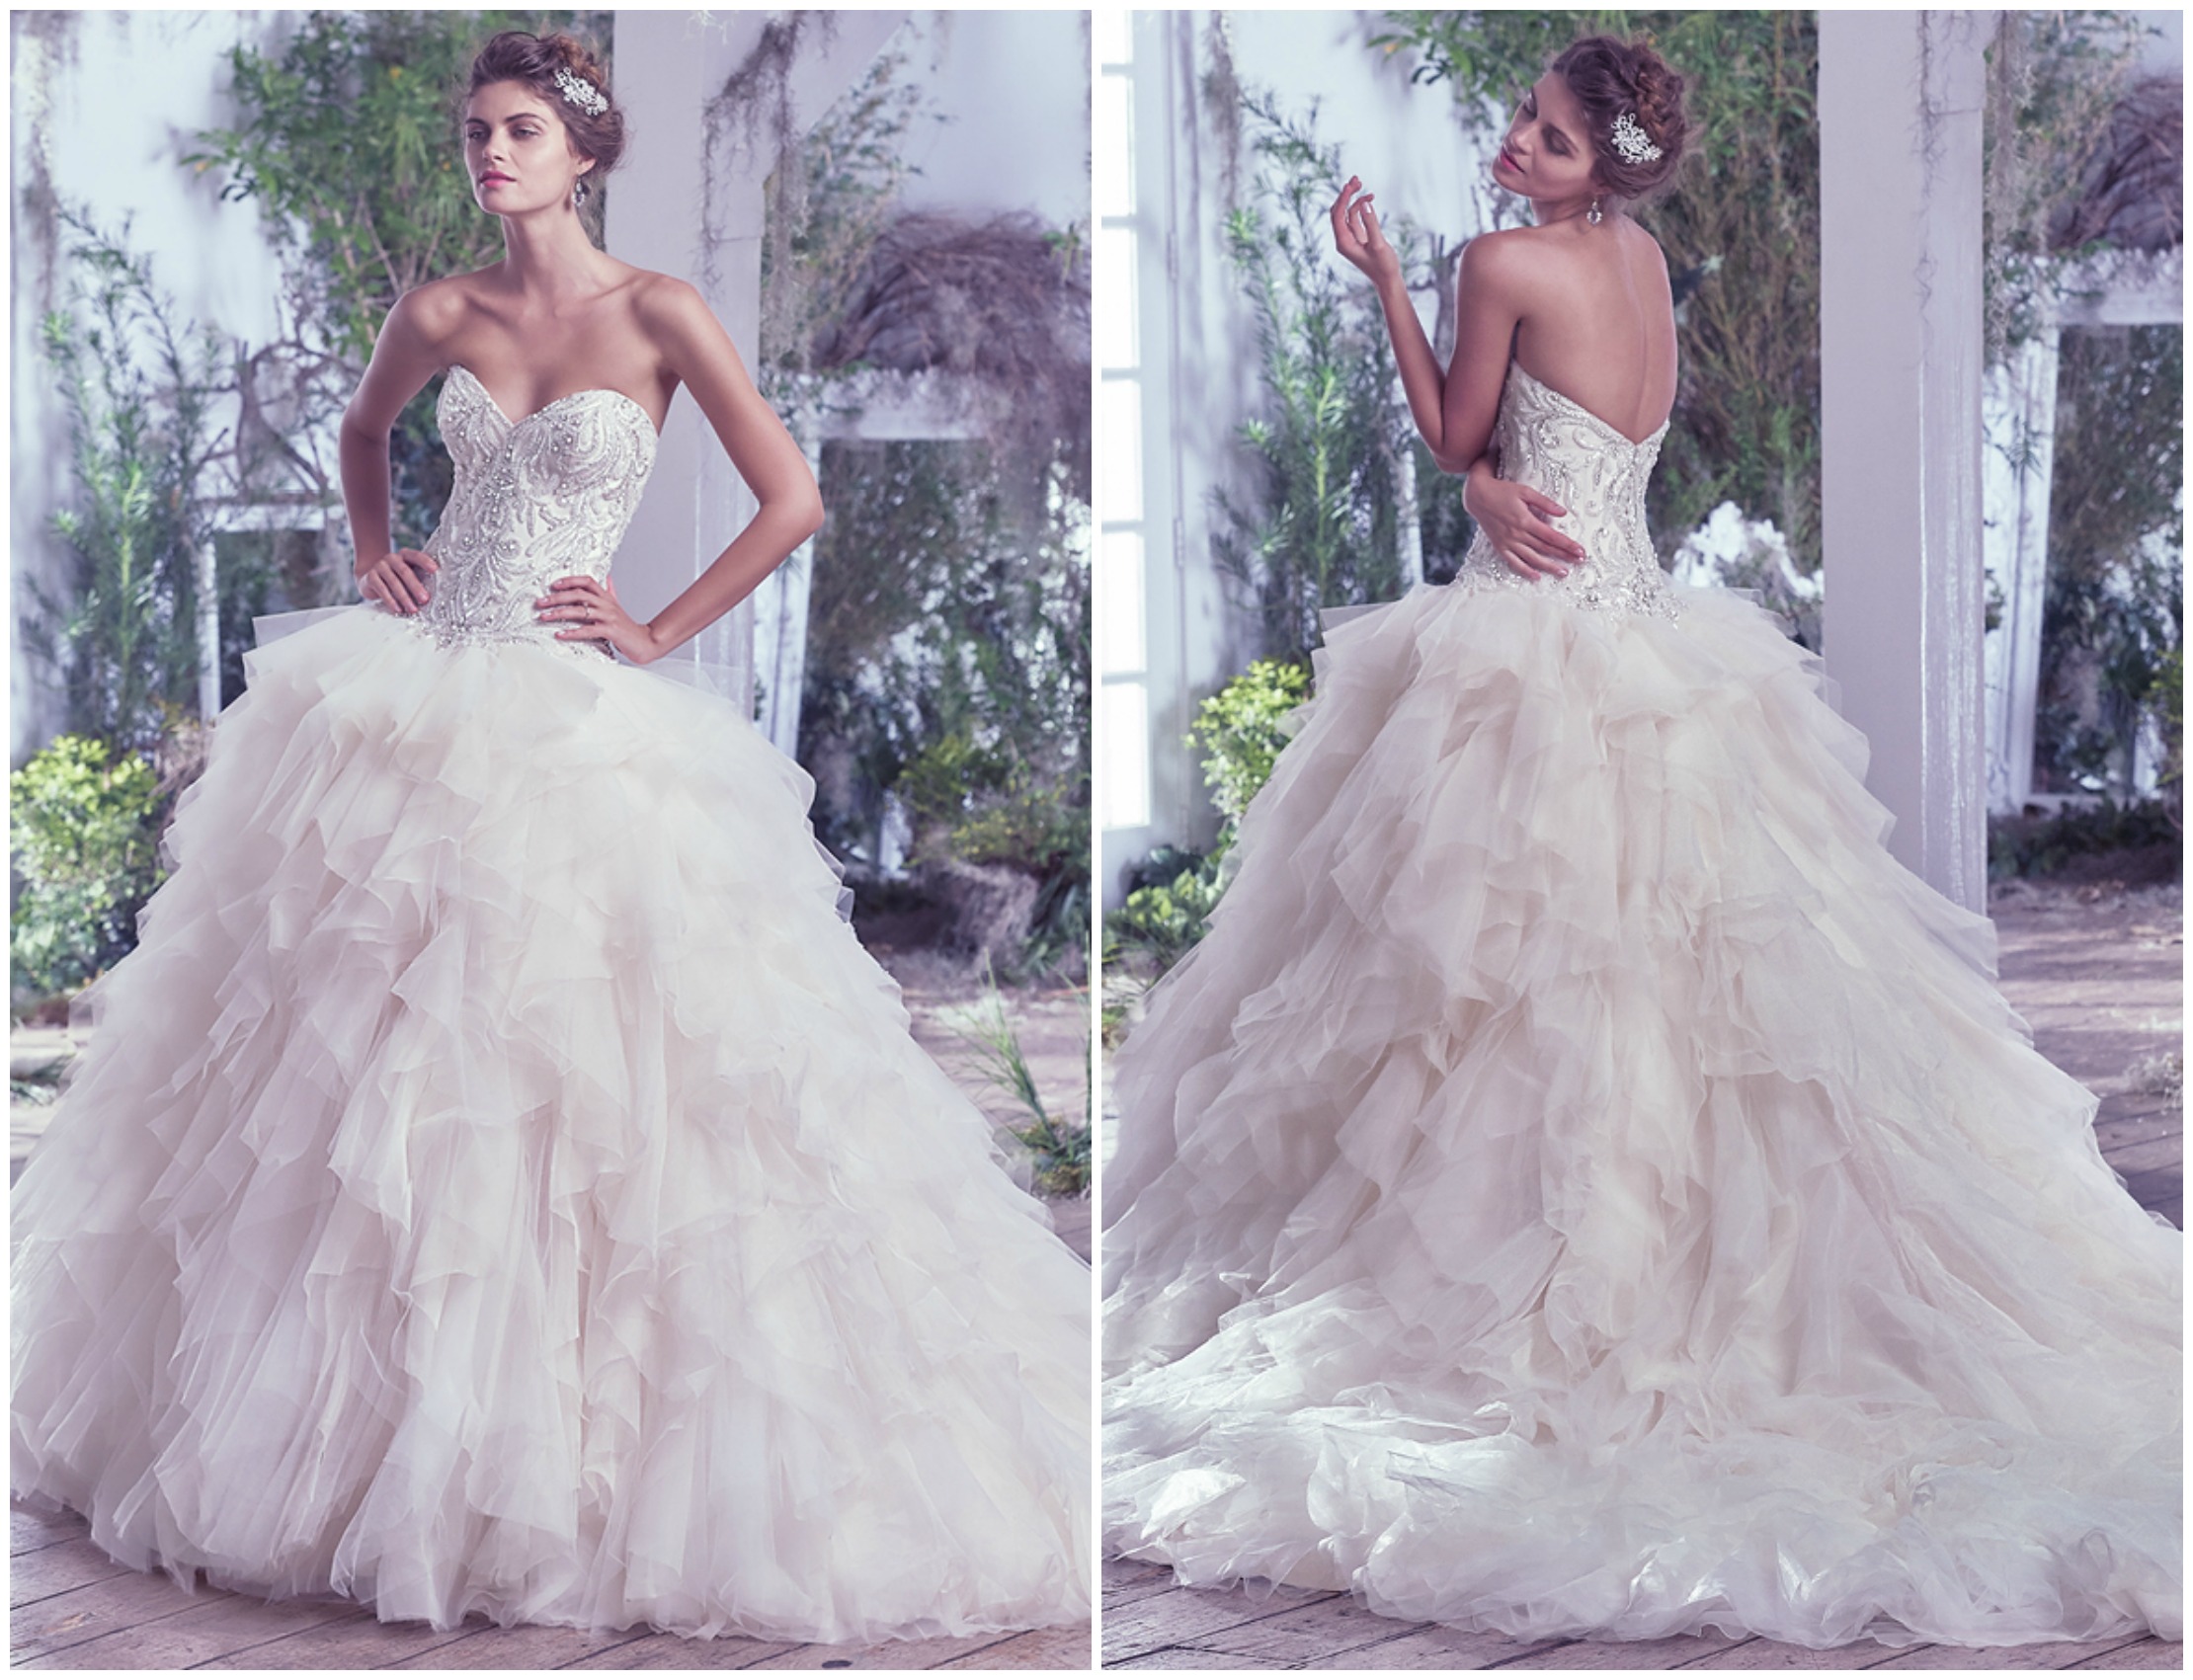 Airy tulle and Chic organza create the dreamy and alluring skirt of this grand ball gown wedding dress, artistically embellished with beading and Swarovski crystals, fitted bodice and romantic sweetheart neckline. Finished with covered buttons over zipper and inner corset closure. Available with extended train (16" longer), Castalia Marie.

<a href="https://www.maggiesottero.com/maggie-sottero/castalia/9688" target="_blank">Maggie Sottero</a>